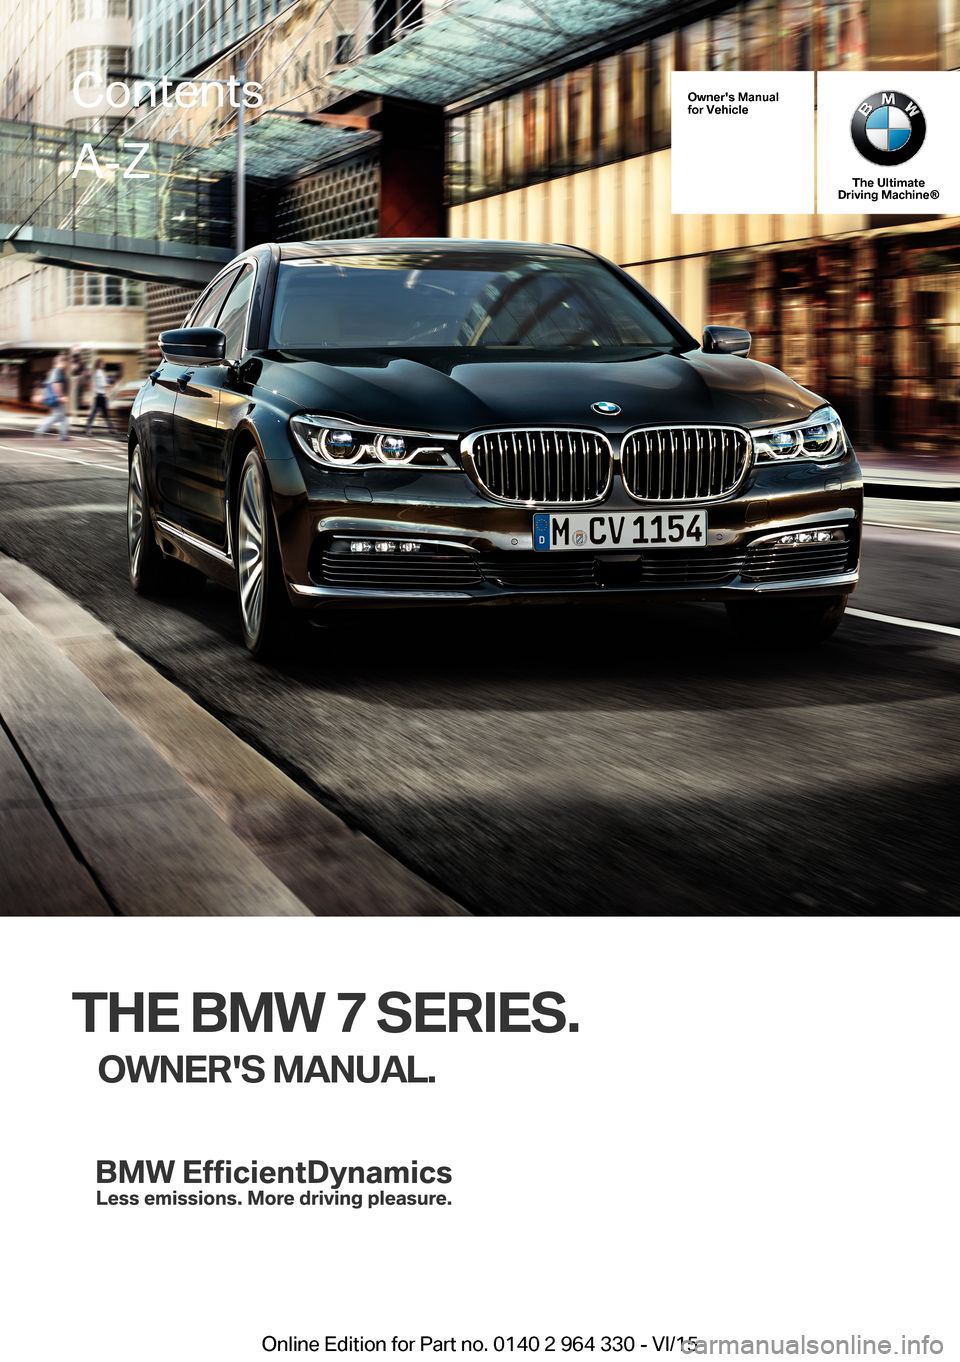 BMW 7 SERIES 2016 G11 Owners Manual Owners Manualfor Vehicle
The UltimateDriving Machine®
THE BMW 7 SERIES.
OWNERS MANUAL.ContentsA-Z
Online Edition for Part no. 0140 2 964 330 - VI/15   